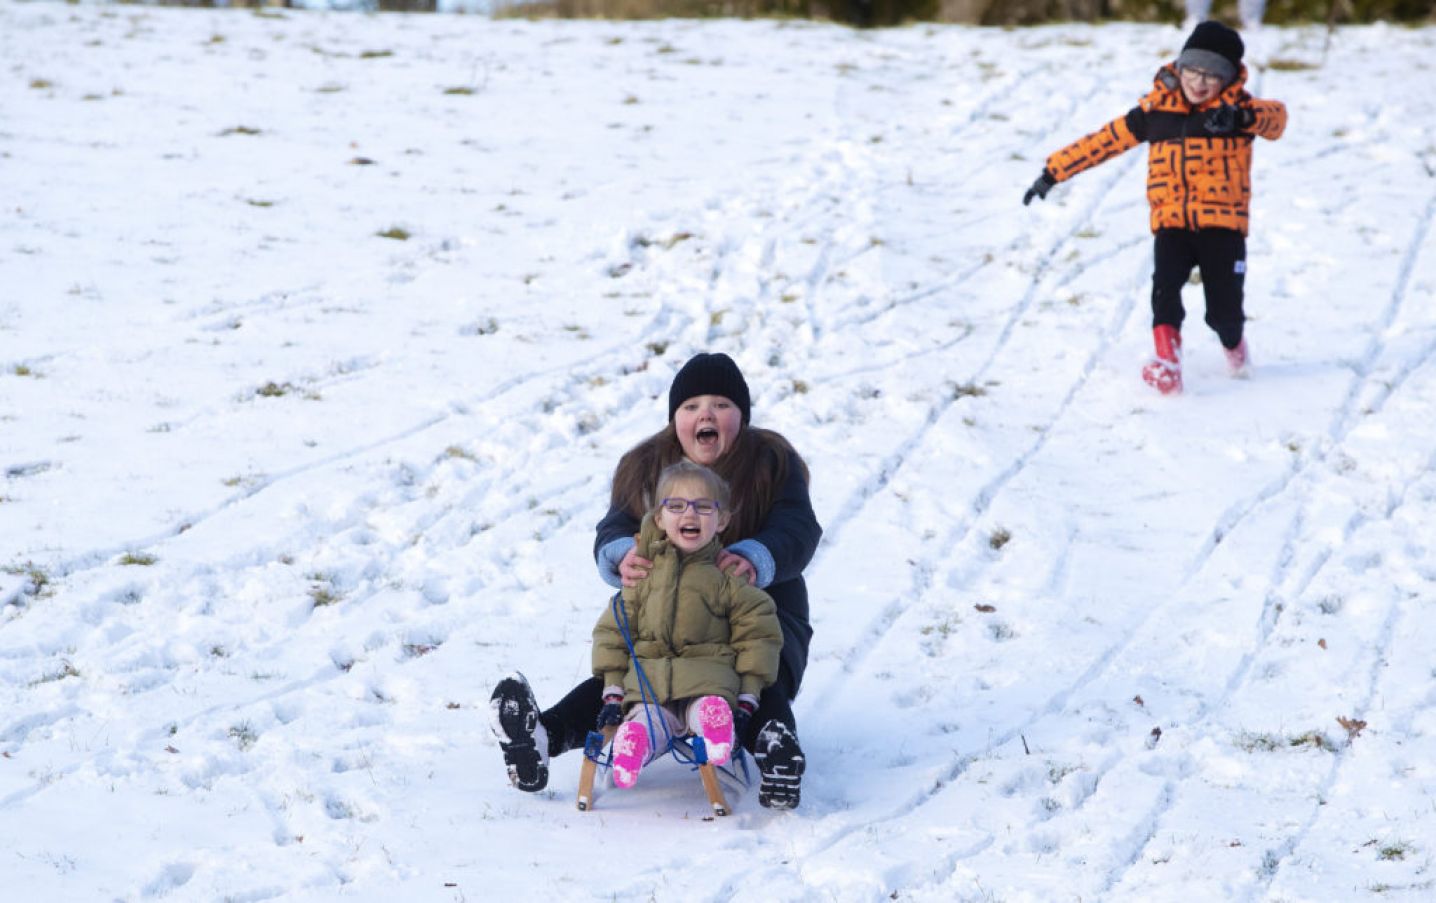 Bonnie Lawrence (4) And Emmie Mills (10) Sled Down A Hill In The Wicklow Mountains. Photo: Pa Images.